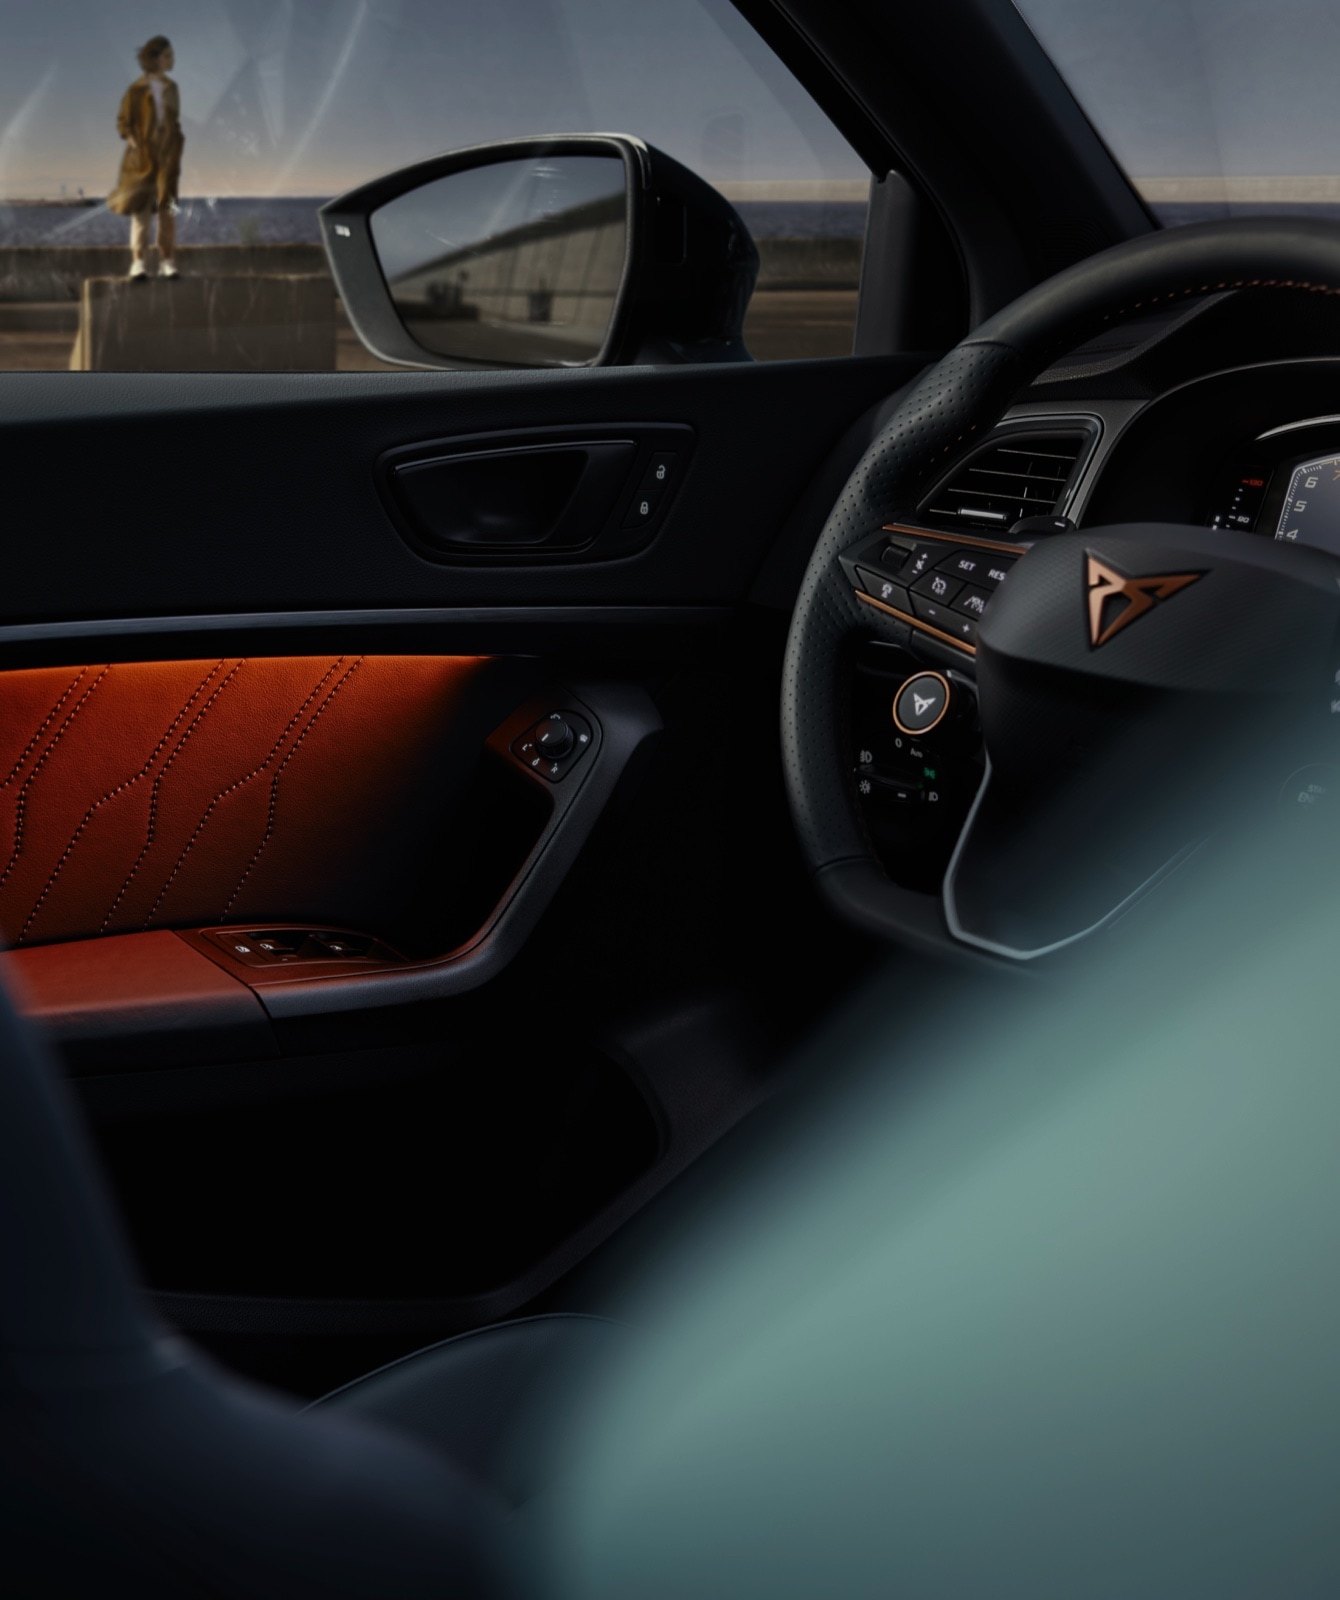 CUPRA%20interior%20car%20view%20of%20the%20steering%20wheel%20and%20rear%20mirror